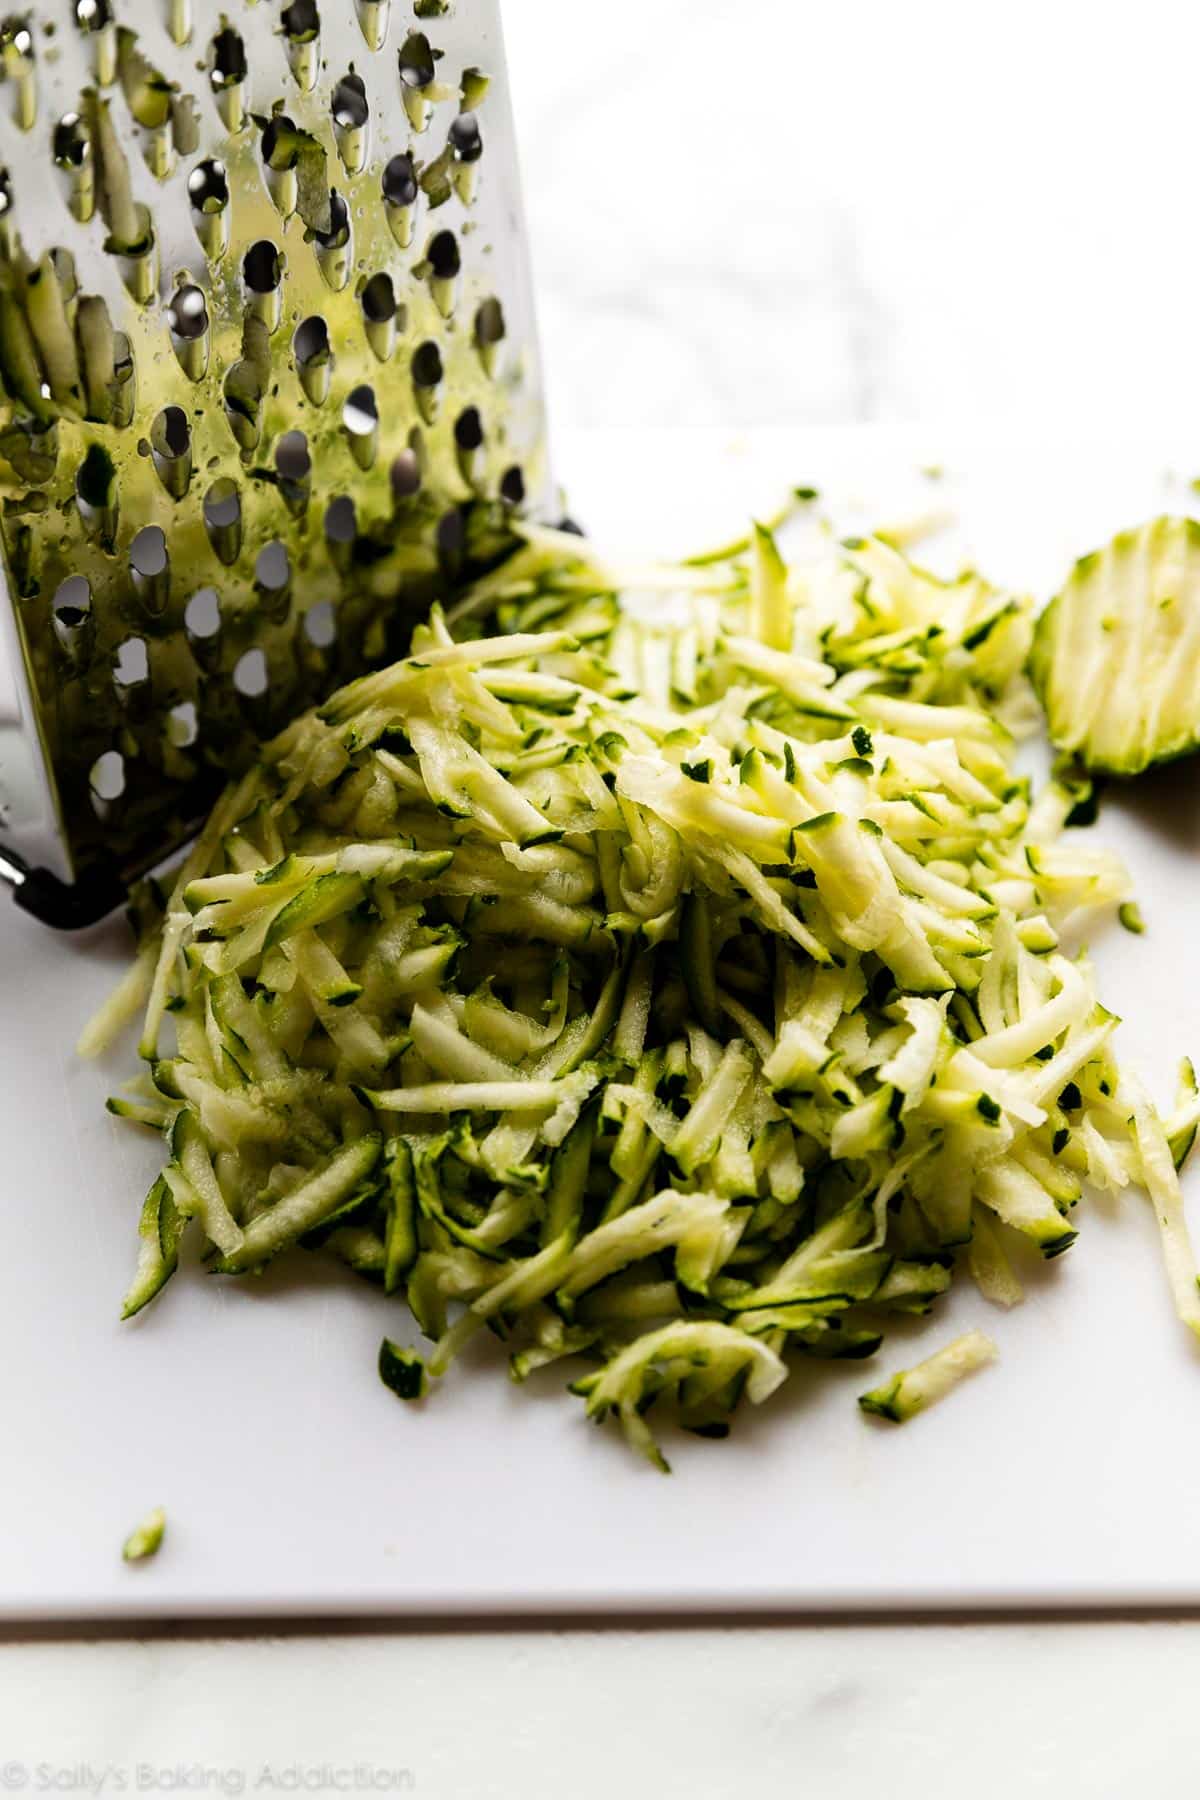 shredded zucchini with box grater